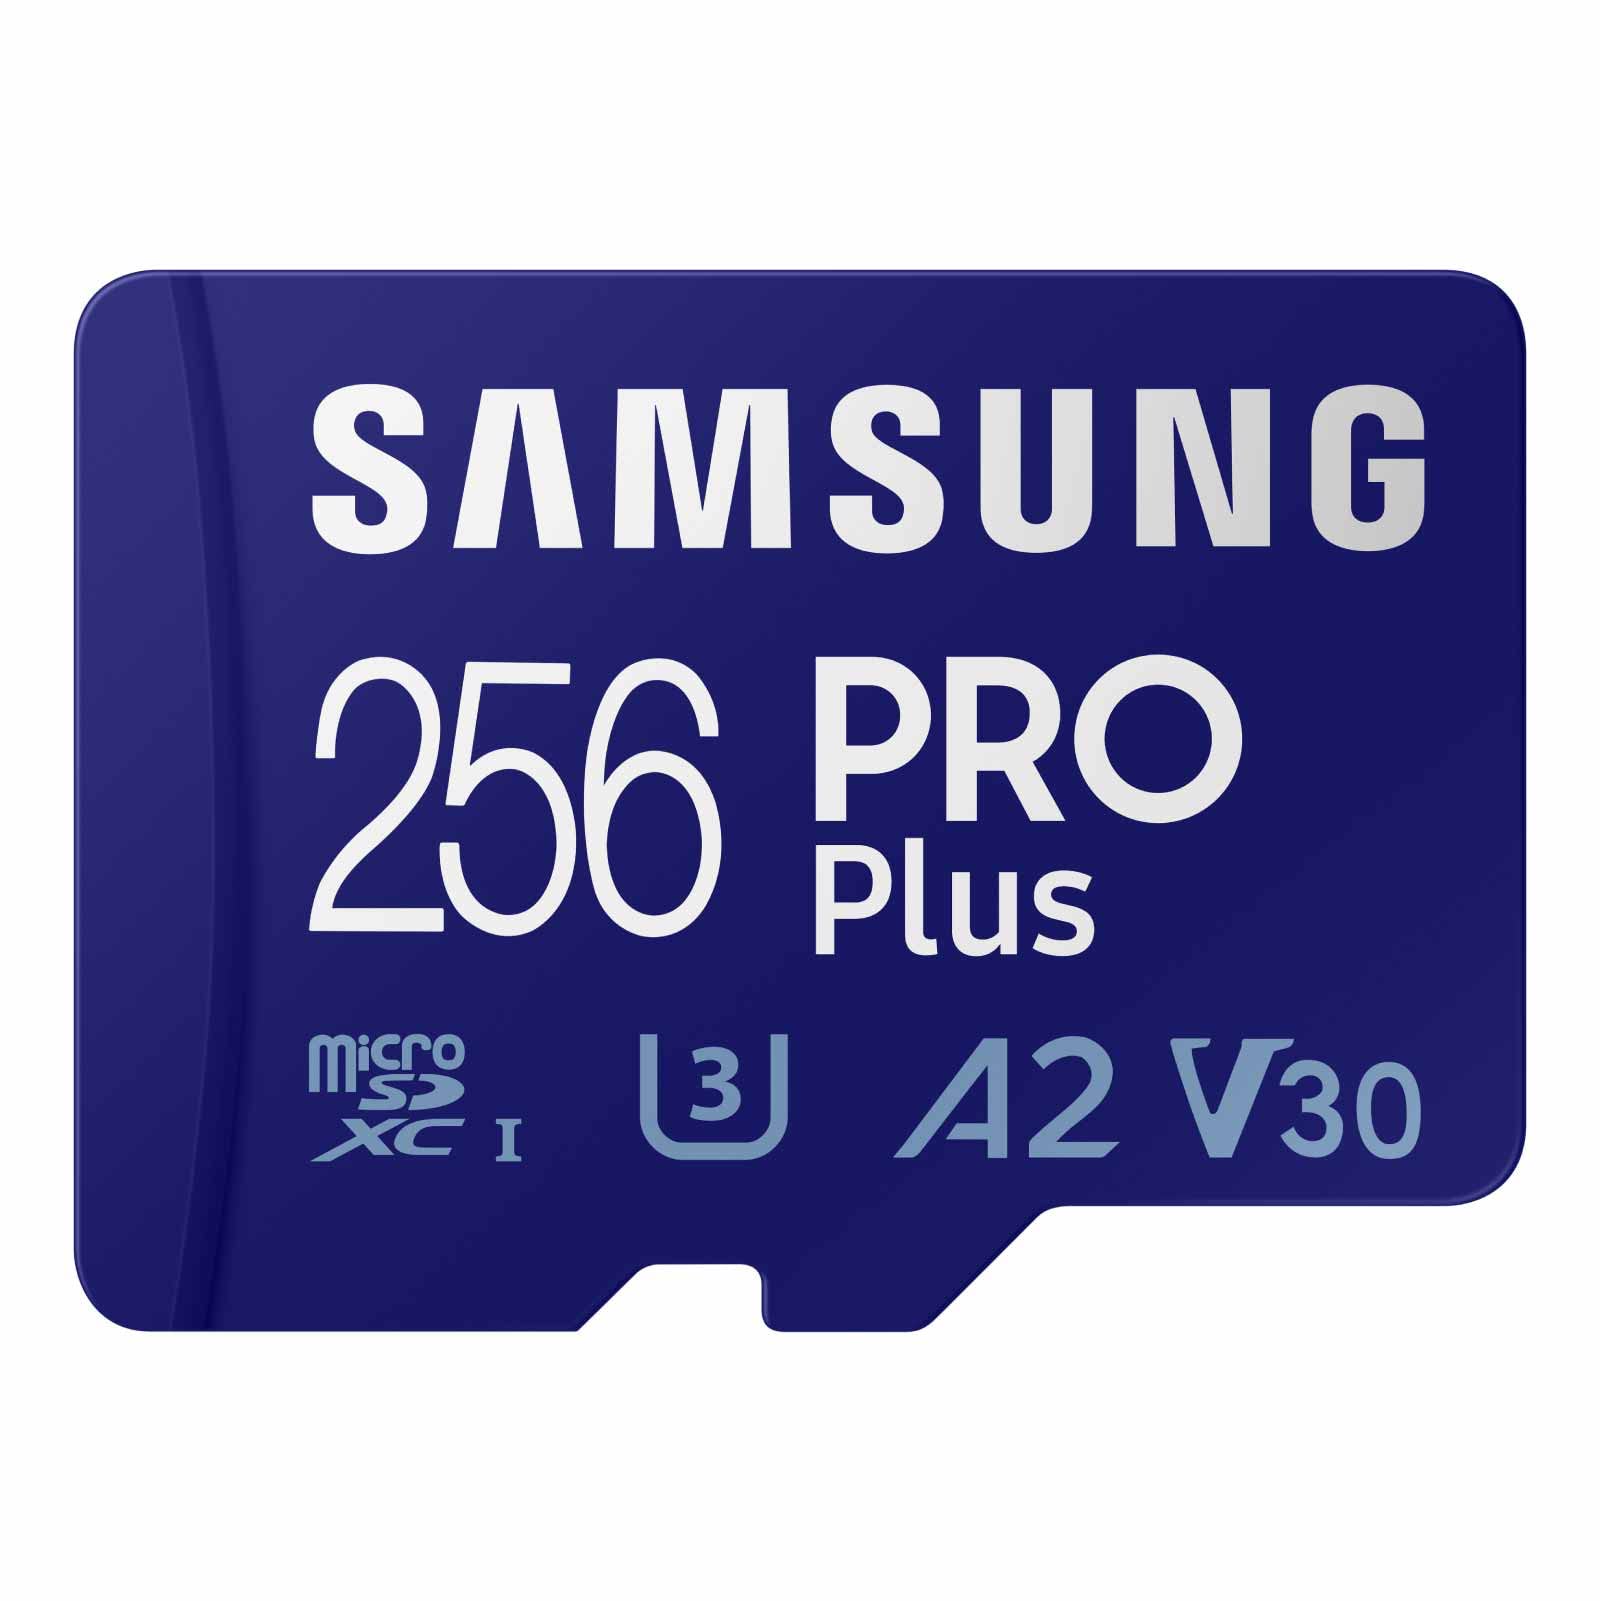 256GB SAMSUNG PRO Plus microSD Memory Card w/ Adapter (MB-MD256SA/AM) $18 + Free Shipping w/ Prime or Orders $35+